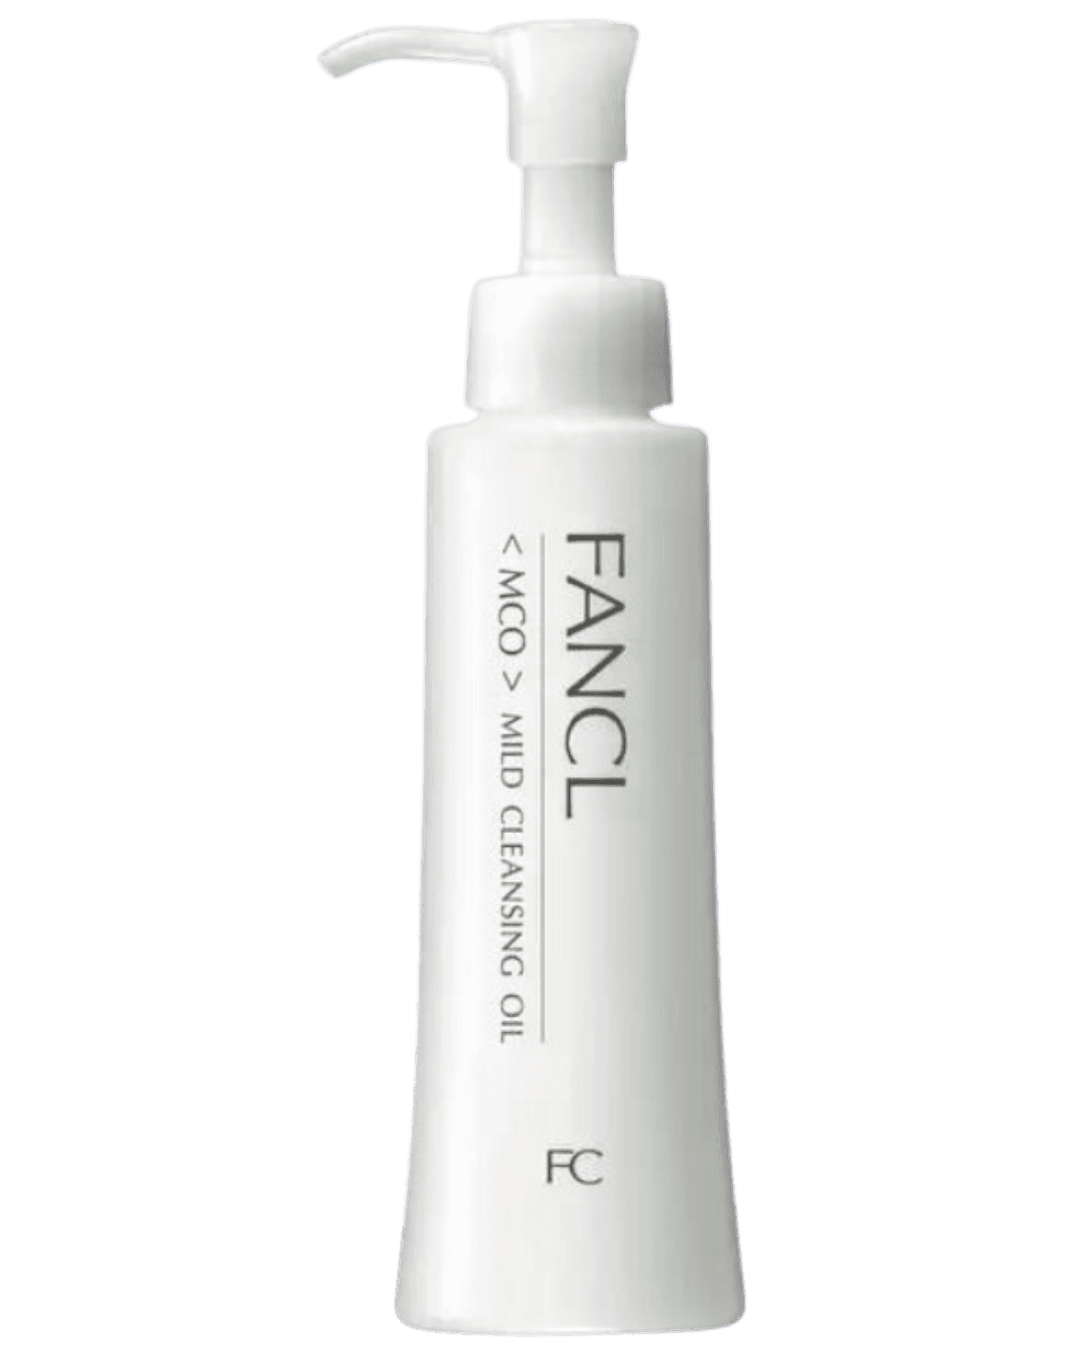 FANCL MCO Mild Cleansing Oil